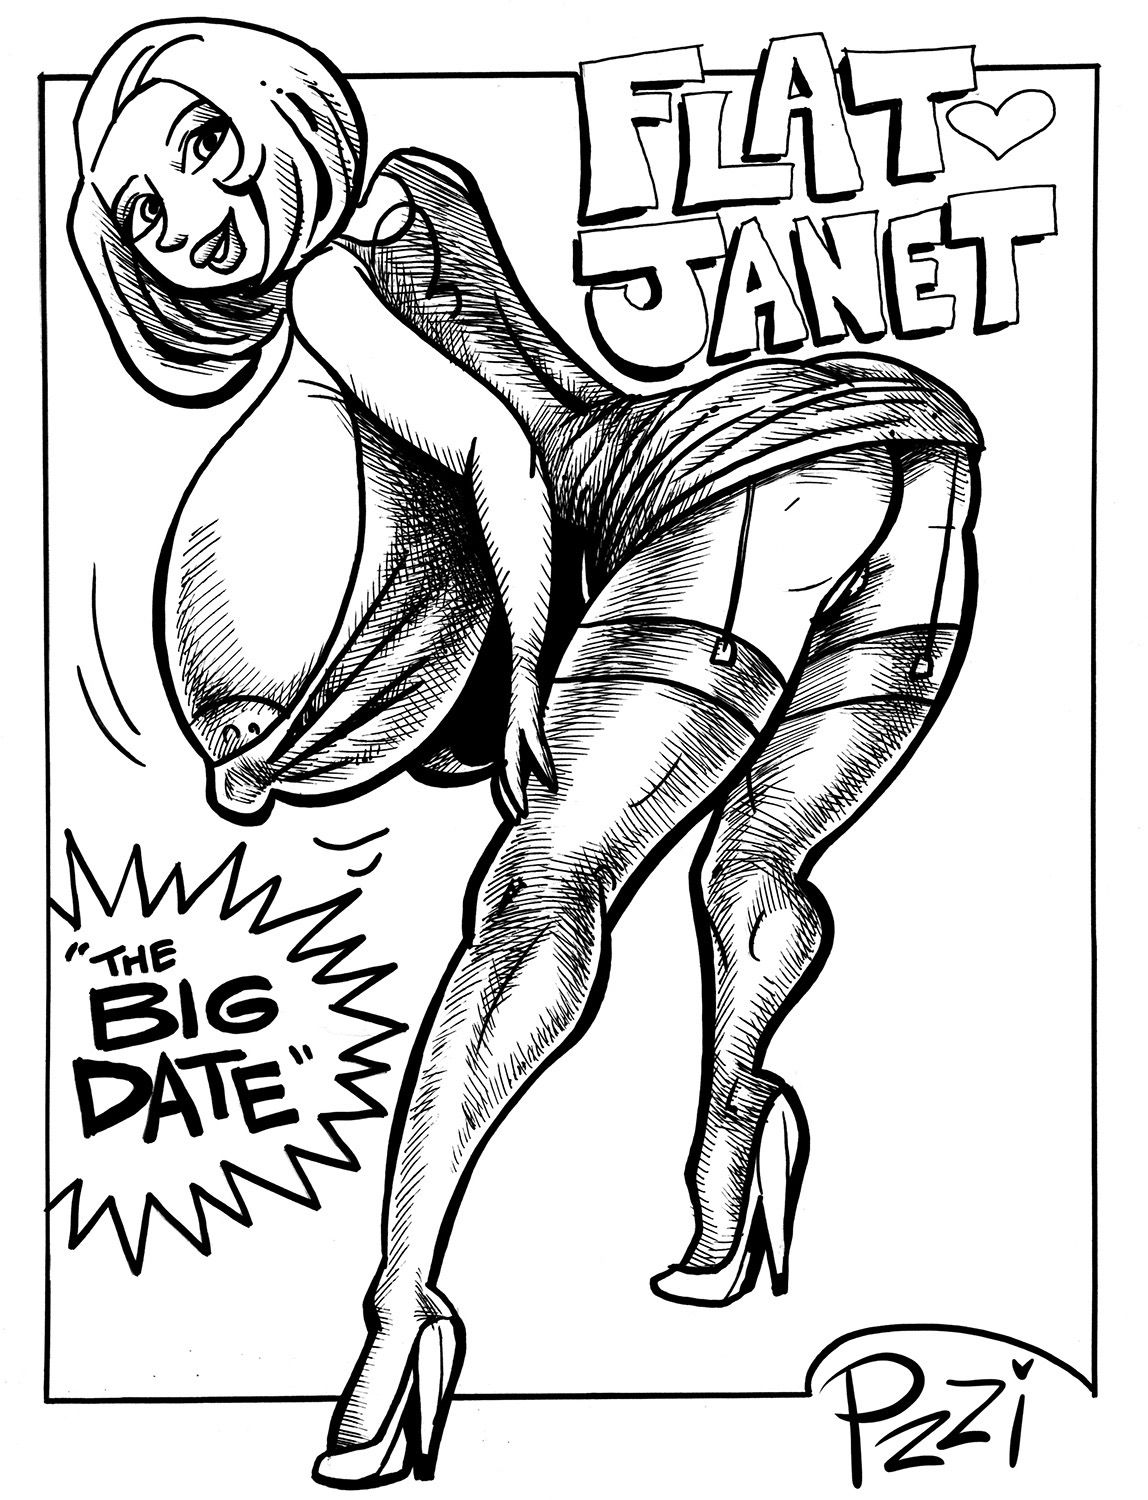 [pzzi] “Flat Janet” - stand alone comic 18 pages (Pen & ink) 1